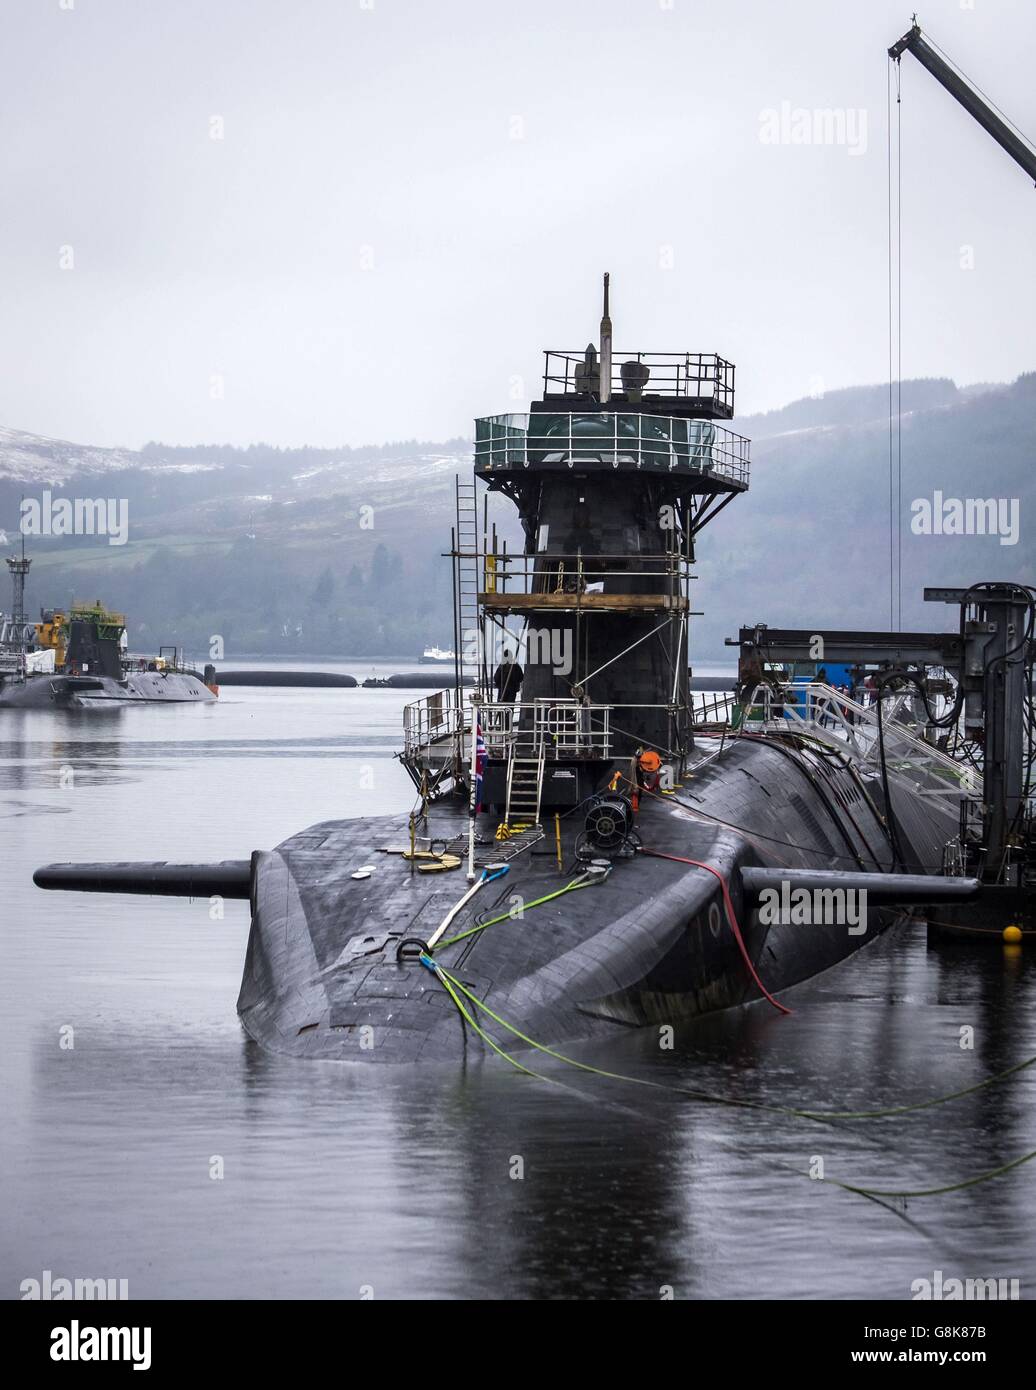 Vanguard-class submarine HMS Vigilant, one of the UK's four nuclear warhead-carrying submarines, at HM Naval Base Clyde, also known as Faslane, ahead of a visit by Defence Secretary Michael Fallon. Stock Photo